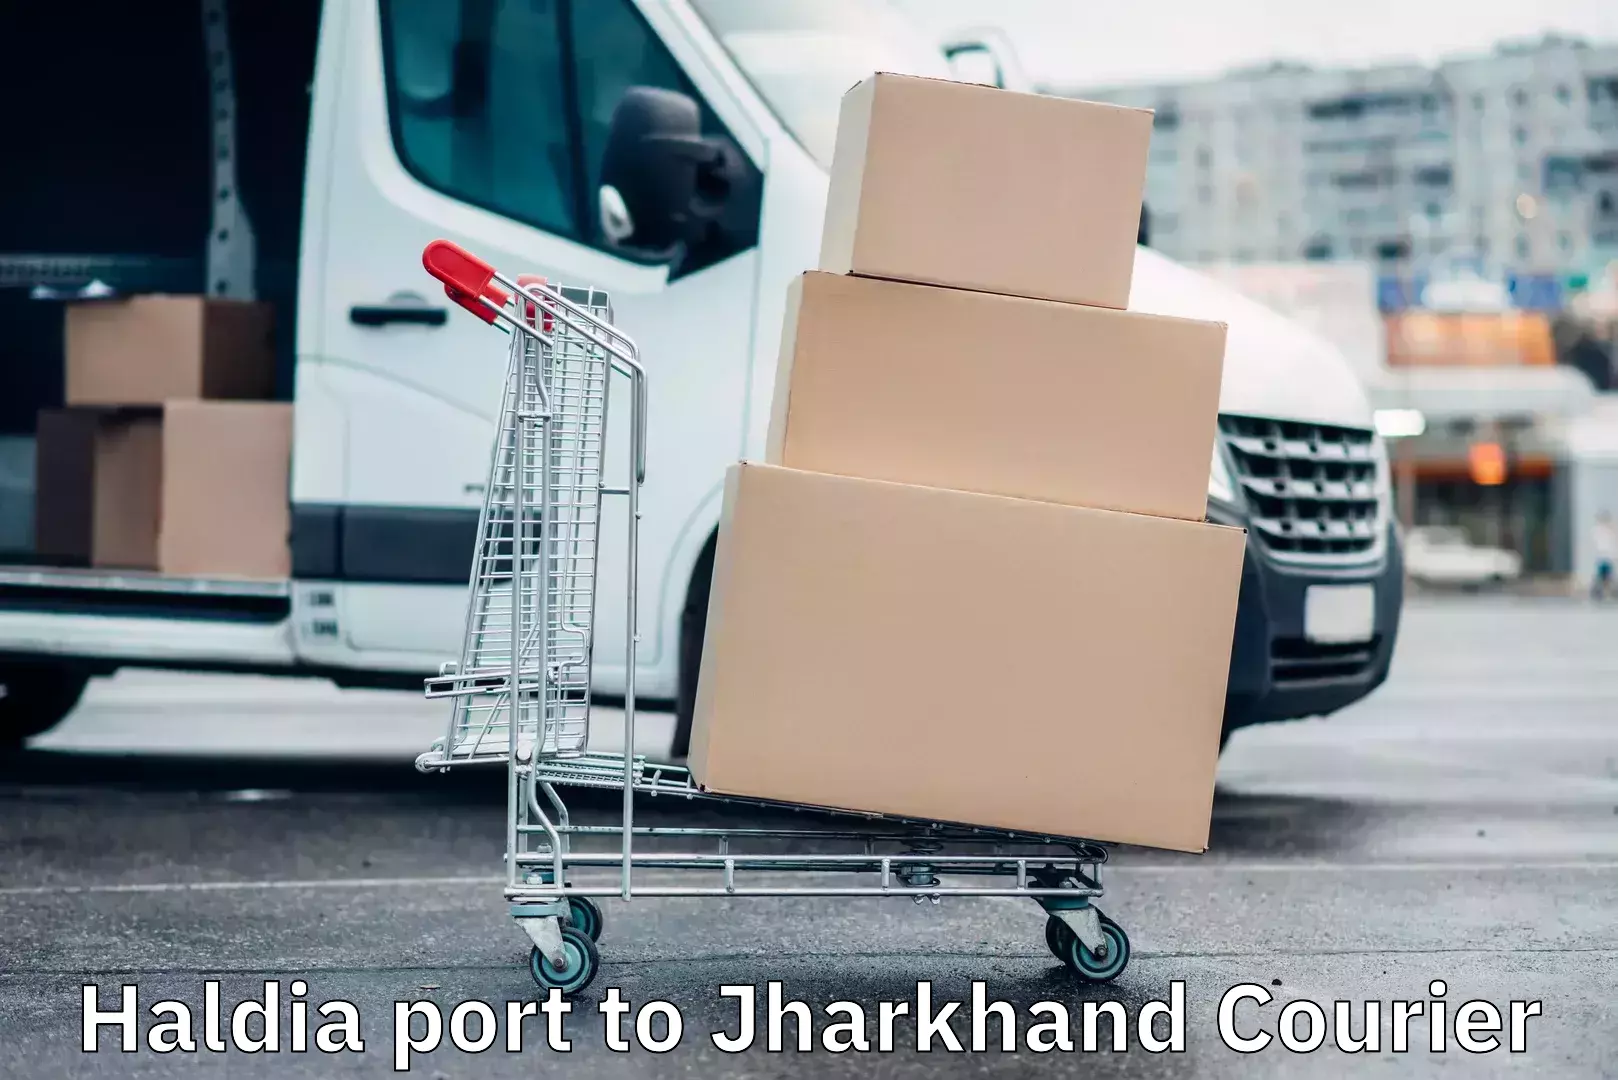 Nationwide delivery network Haldia port to Jharkhand